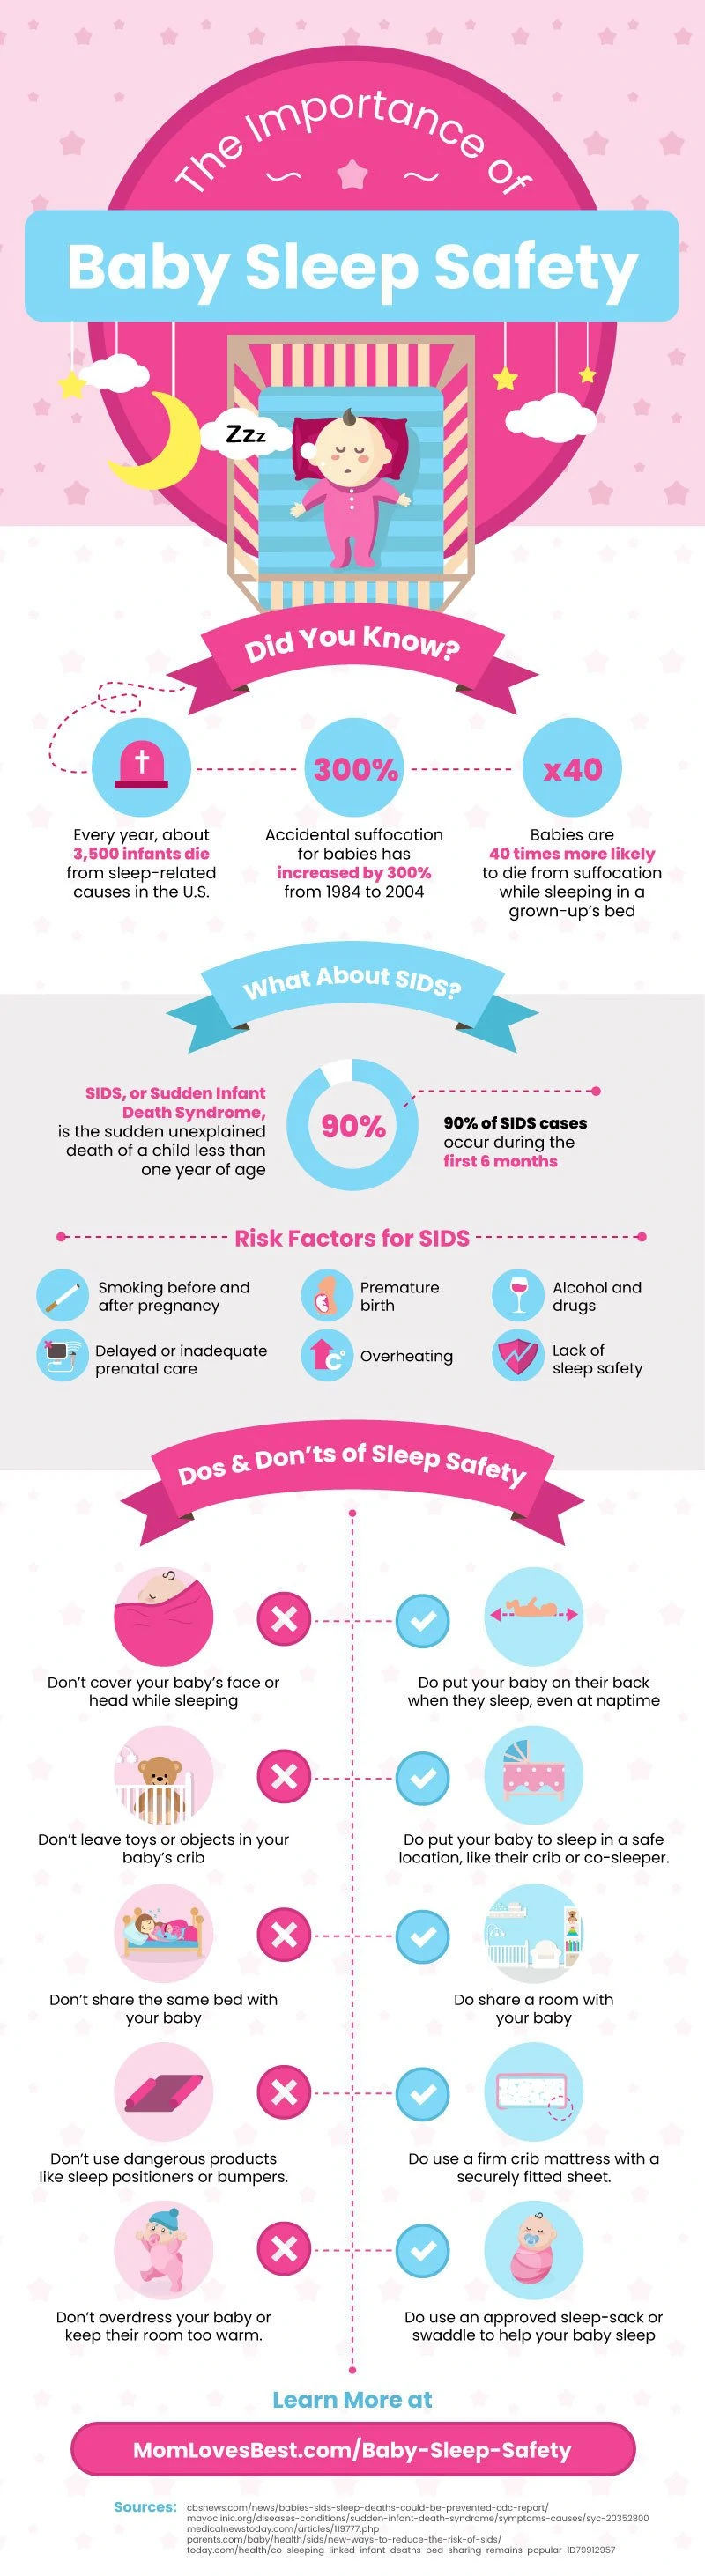 Does the threat of SIDS have you losing sleep? Do you find yourself watching your baby’s every breath at night and losing out on your own sleep? Click here to learn about everything you need to know about what happens when your baby rests its precious head.